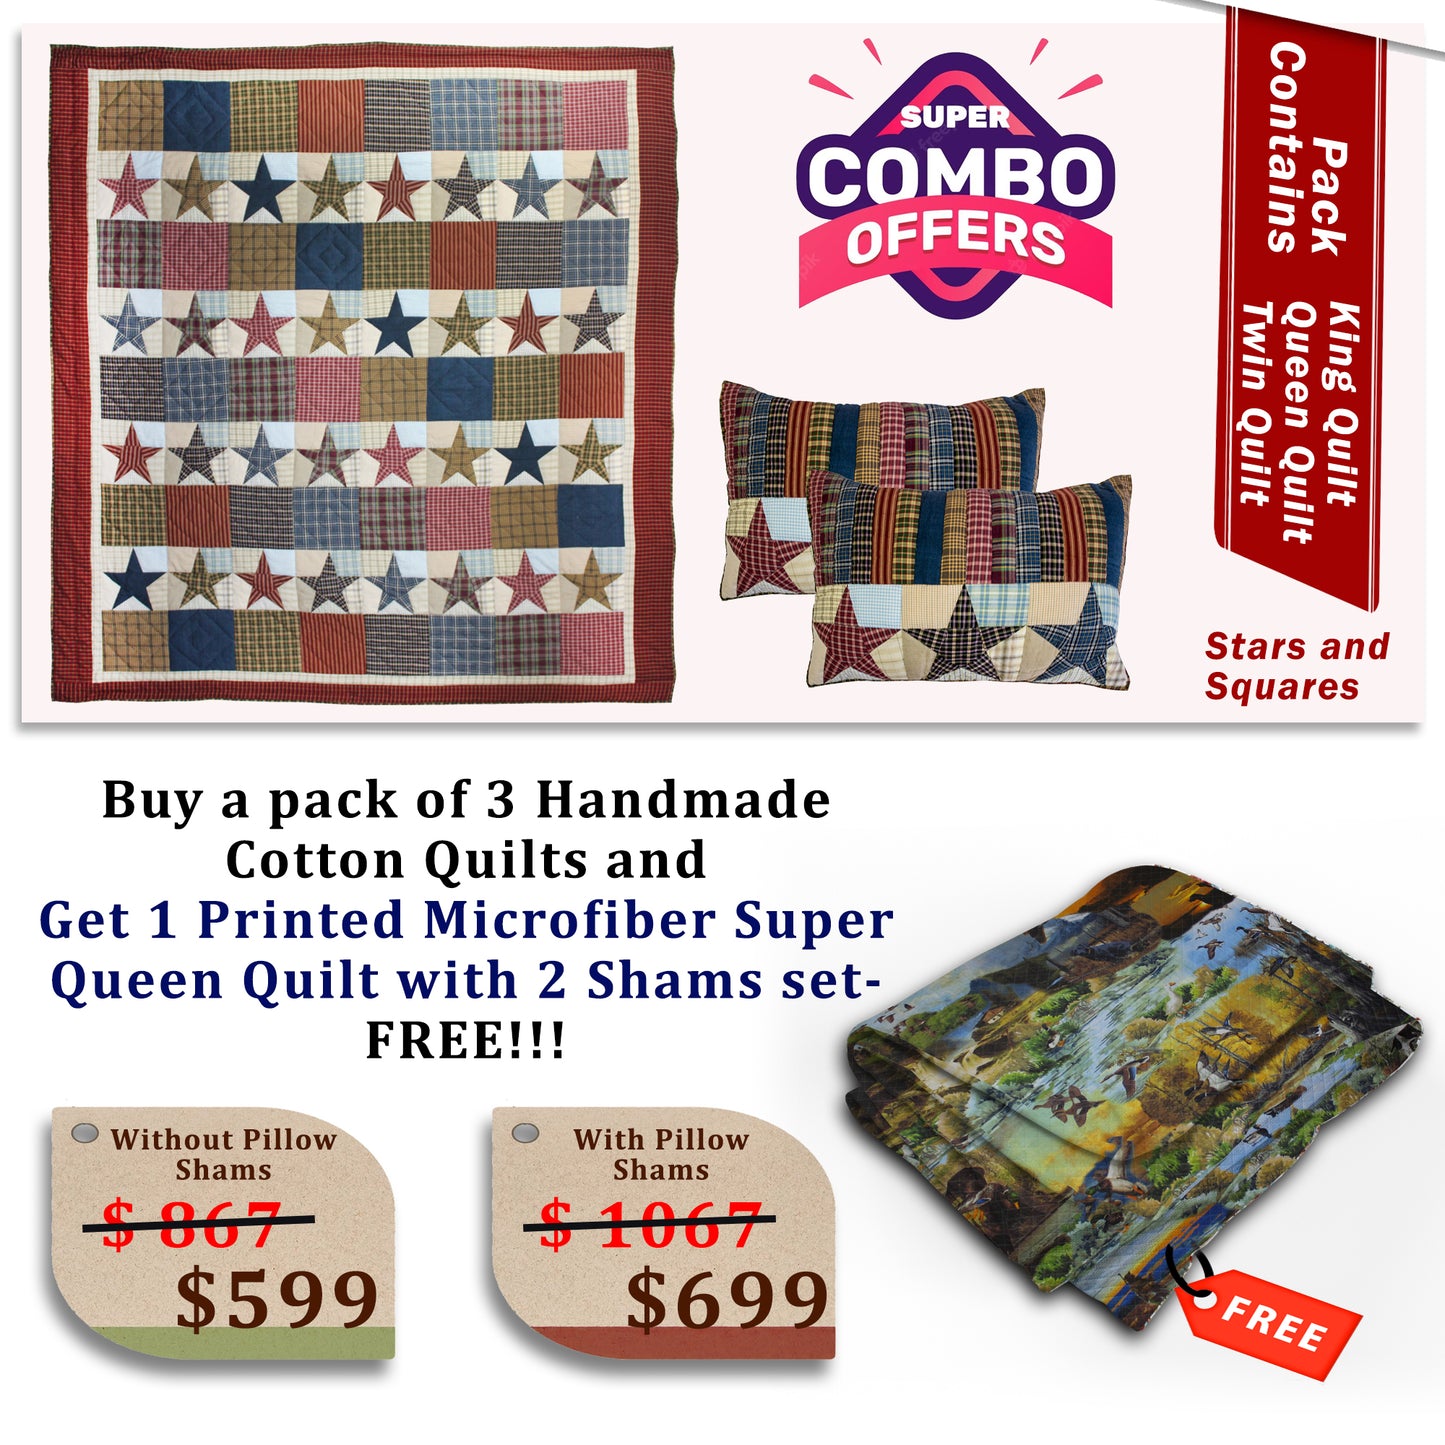 Stars and Squares - Handmade Cotton quilts | Matching pillow shams | Buy 3 cotton quilts and get 1 Printed Microfiber Super Queen Quilt with 2 Shams set FREE